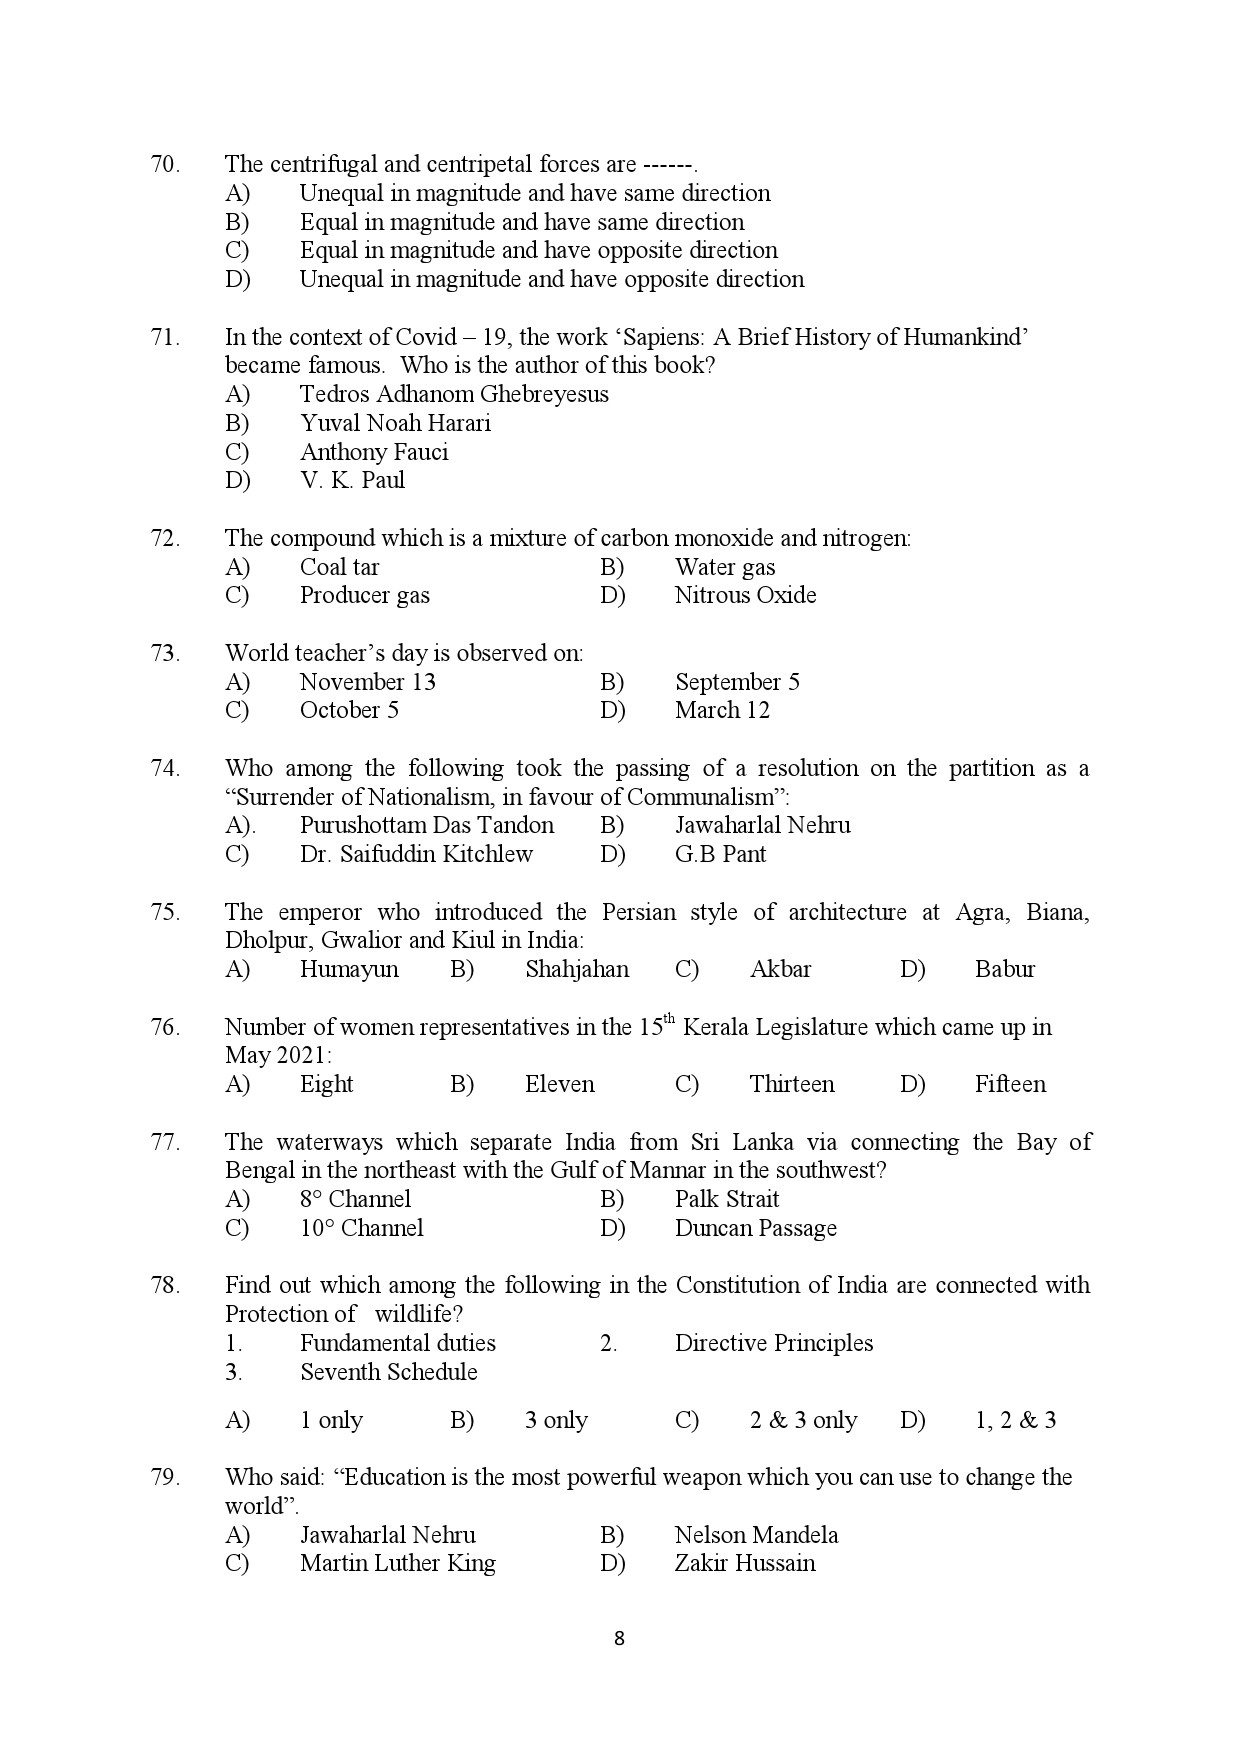 Kerala SET General Knowledge Exam Question Paper January 2022 8